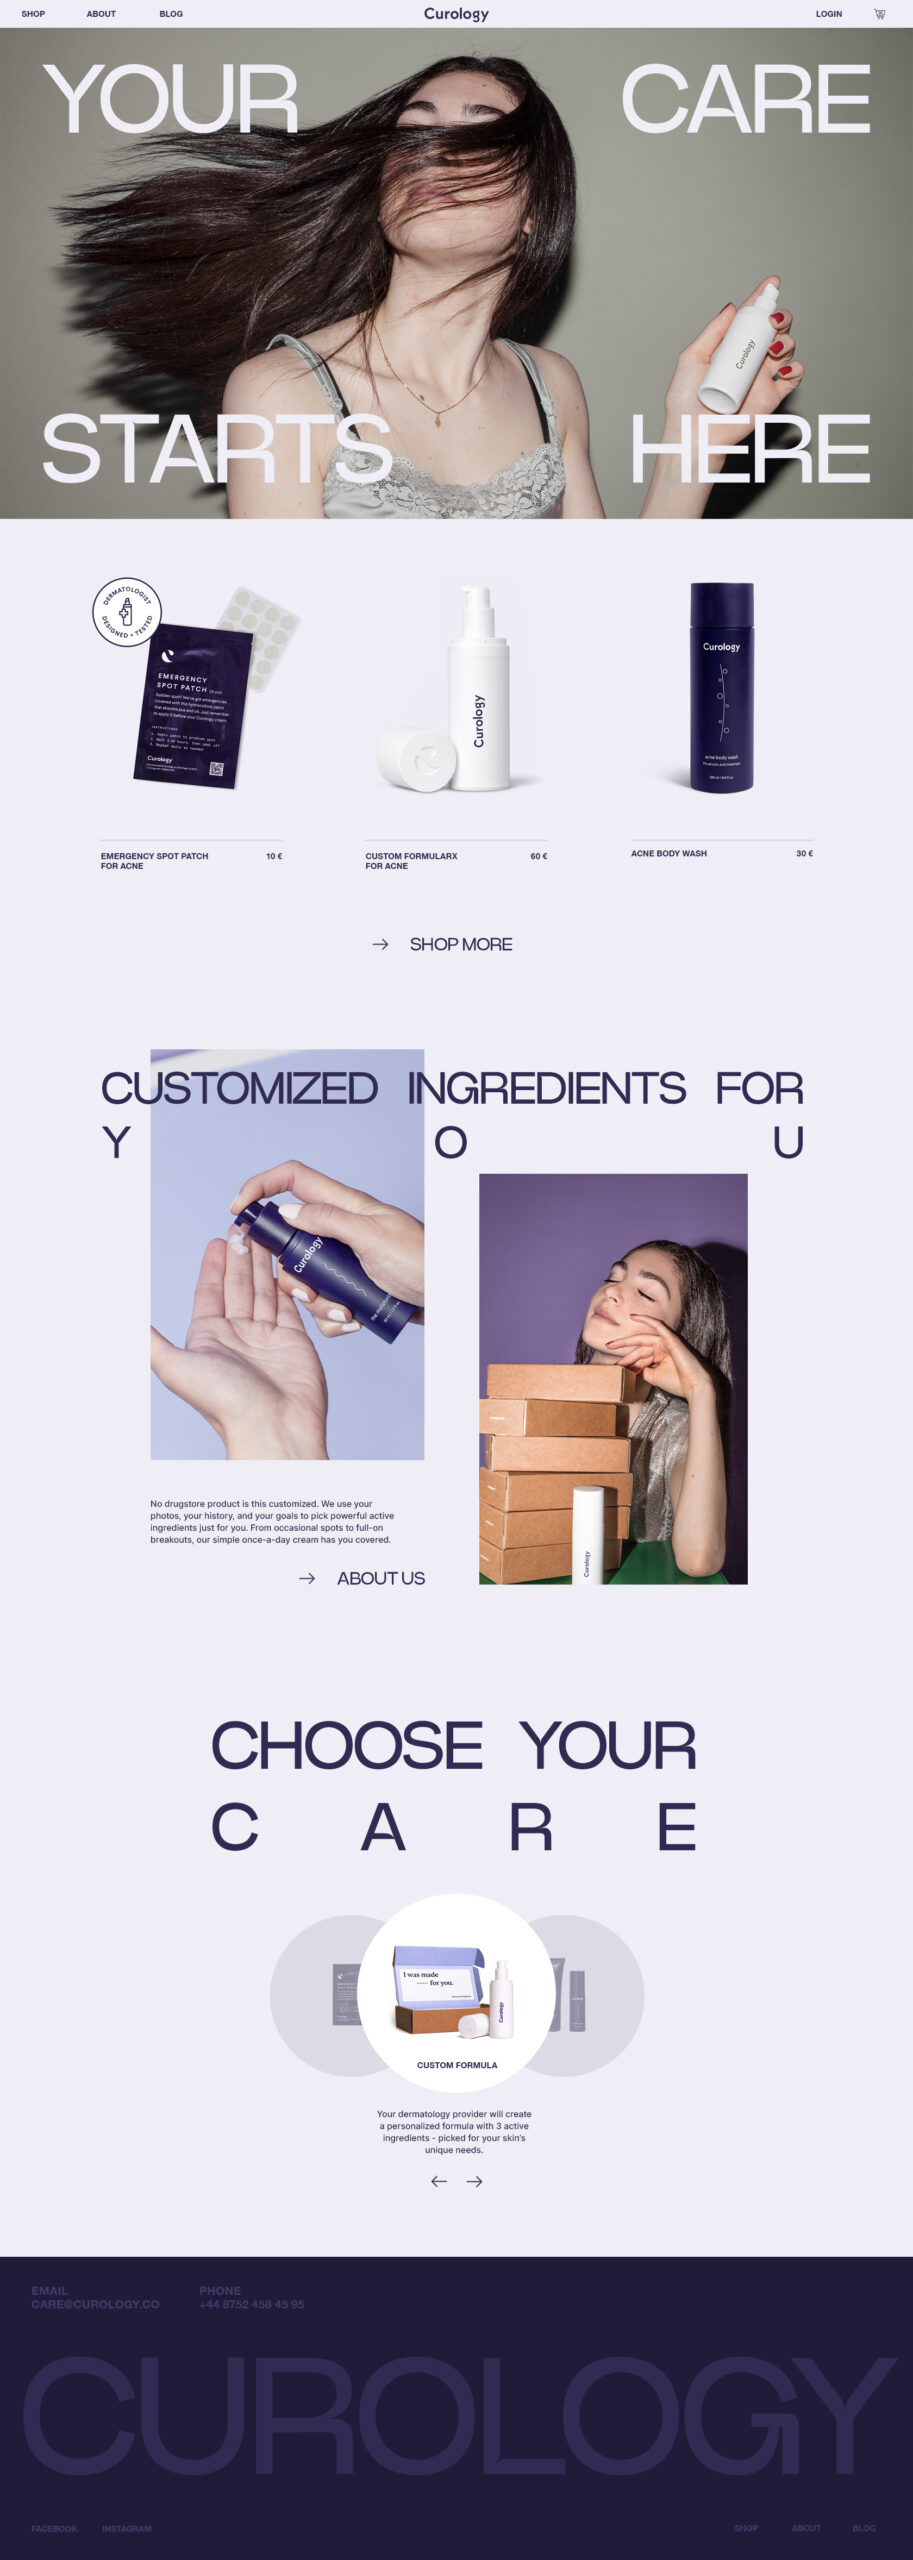 Concept home page for Curology